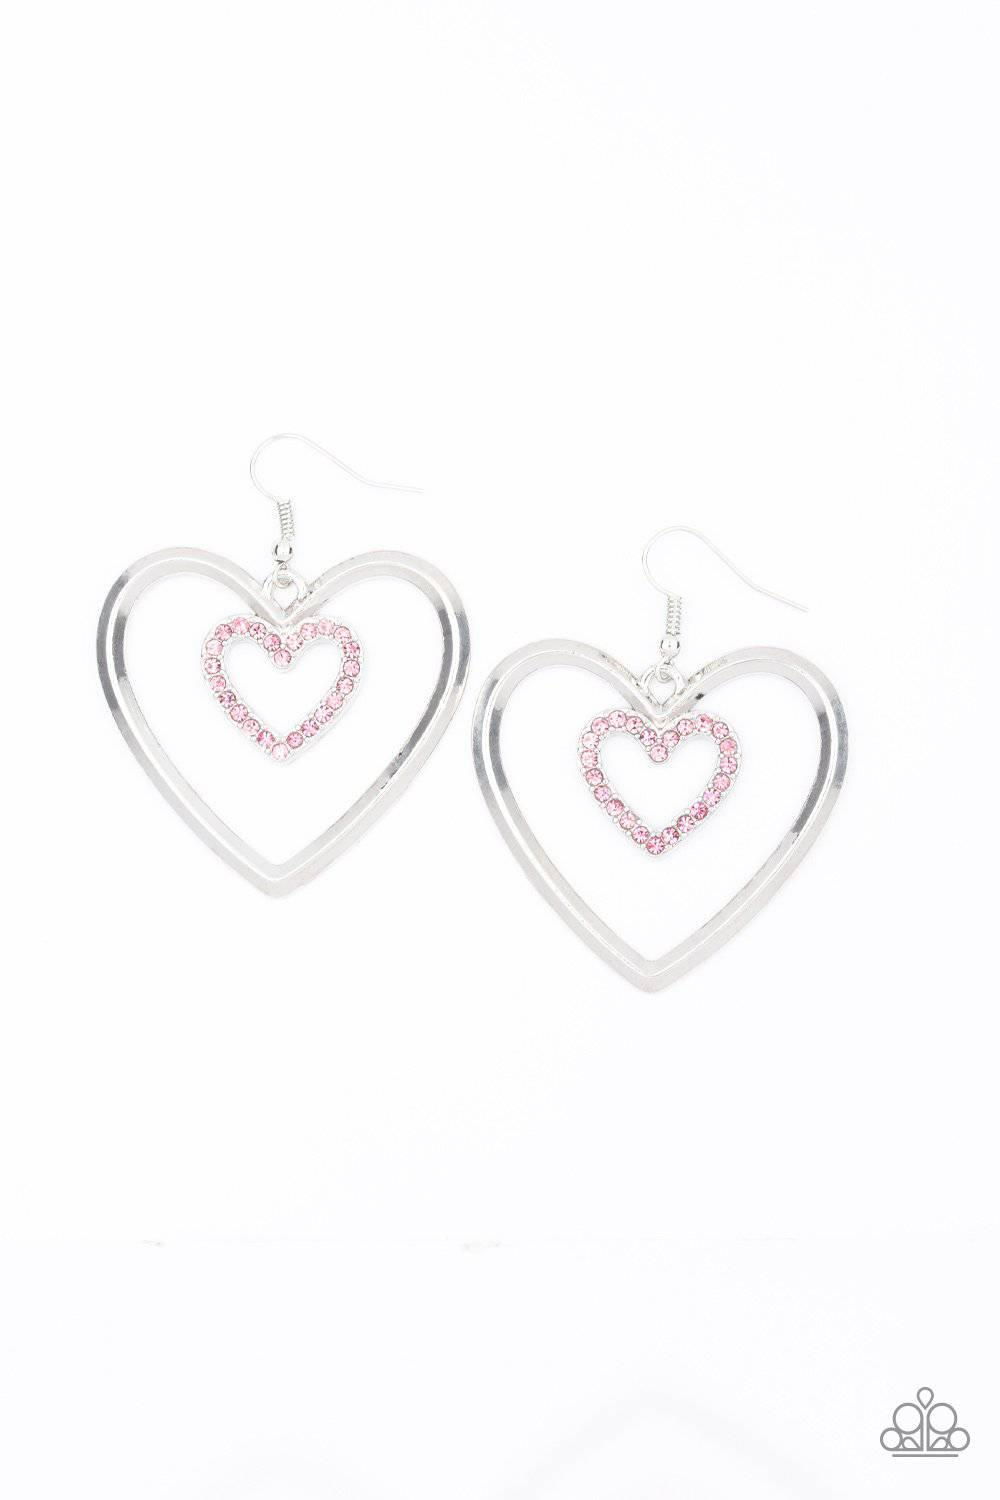 Heart Candy Couture Pink Earrings - Paparazzi Accessories - GlaMarous Titi Jewels